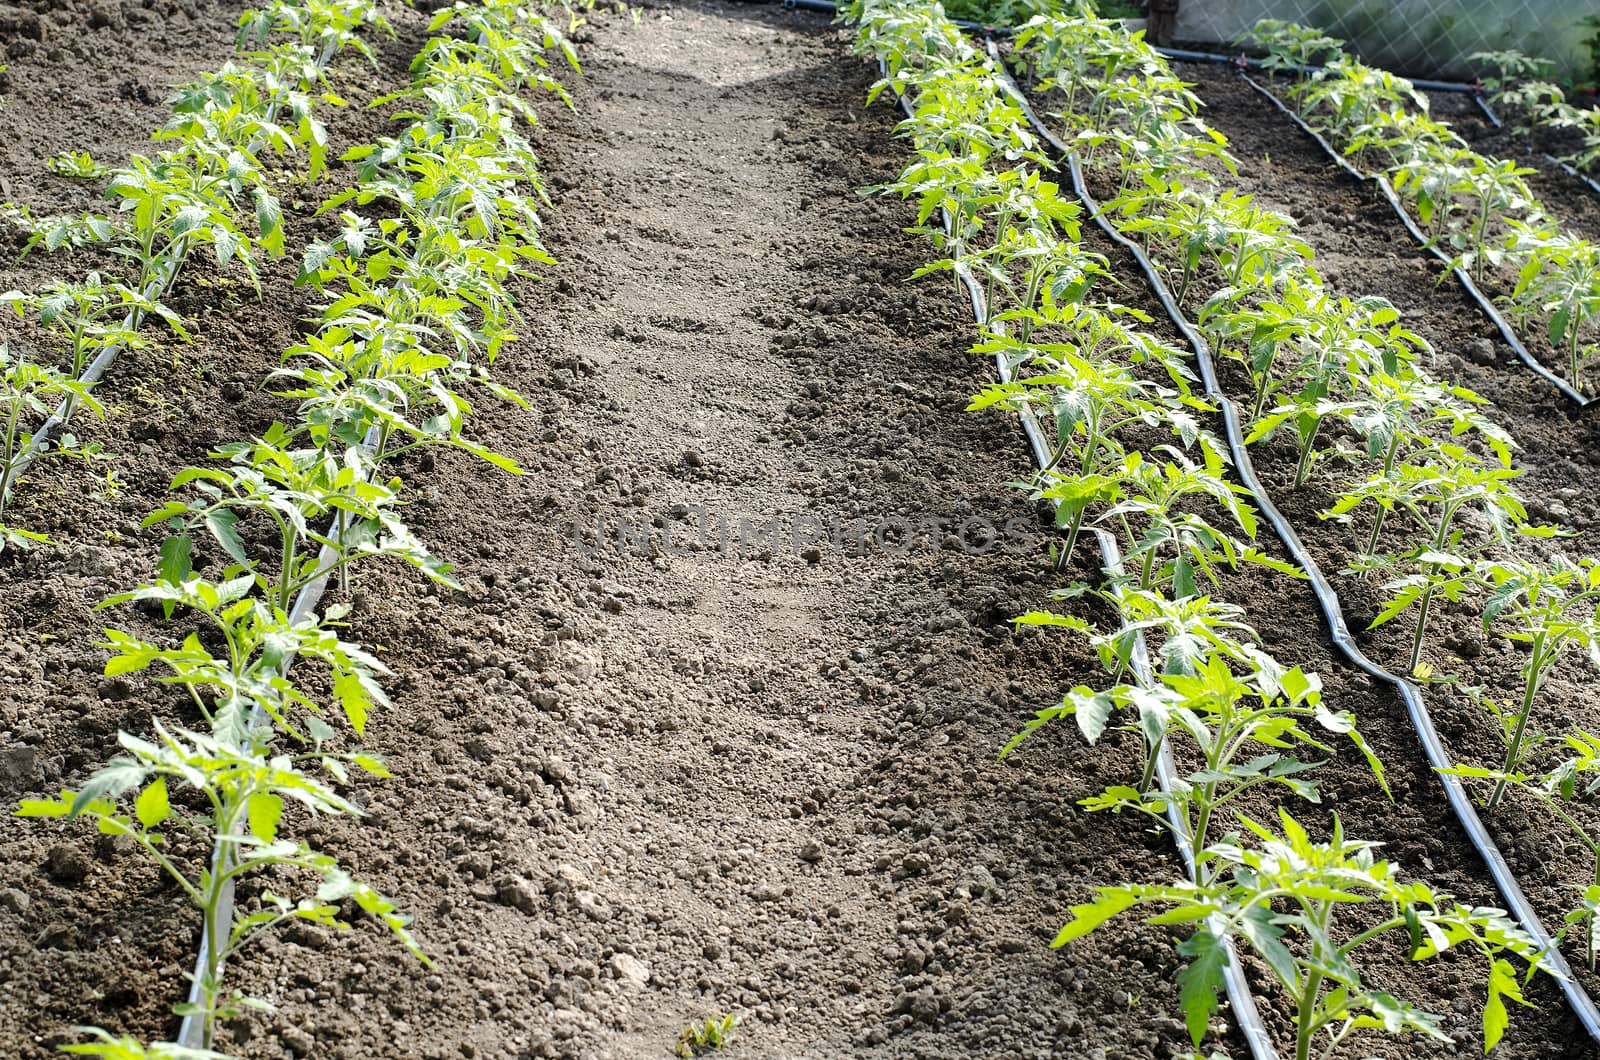 Newly planted tomato shoots in greenhouse by eenevski